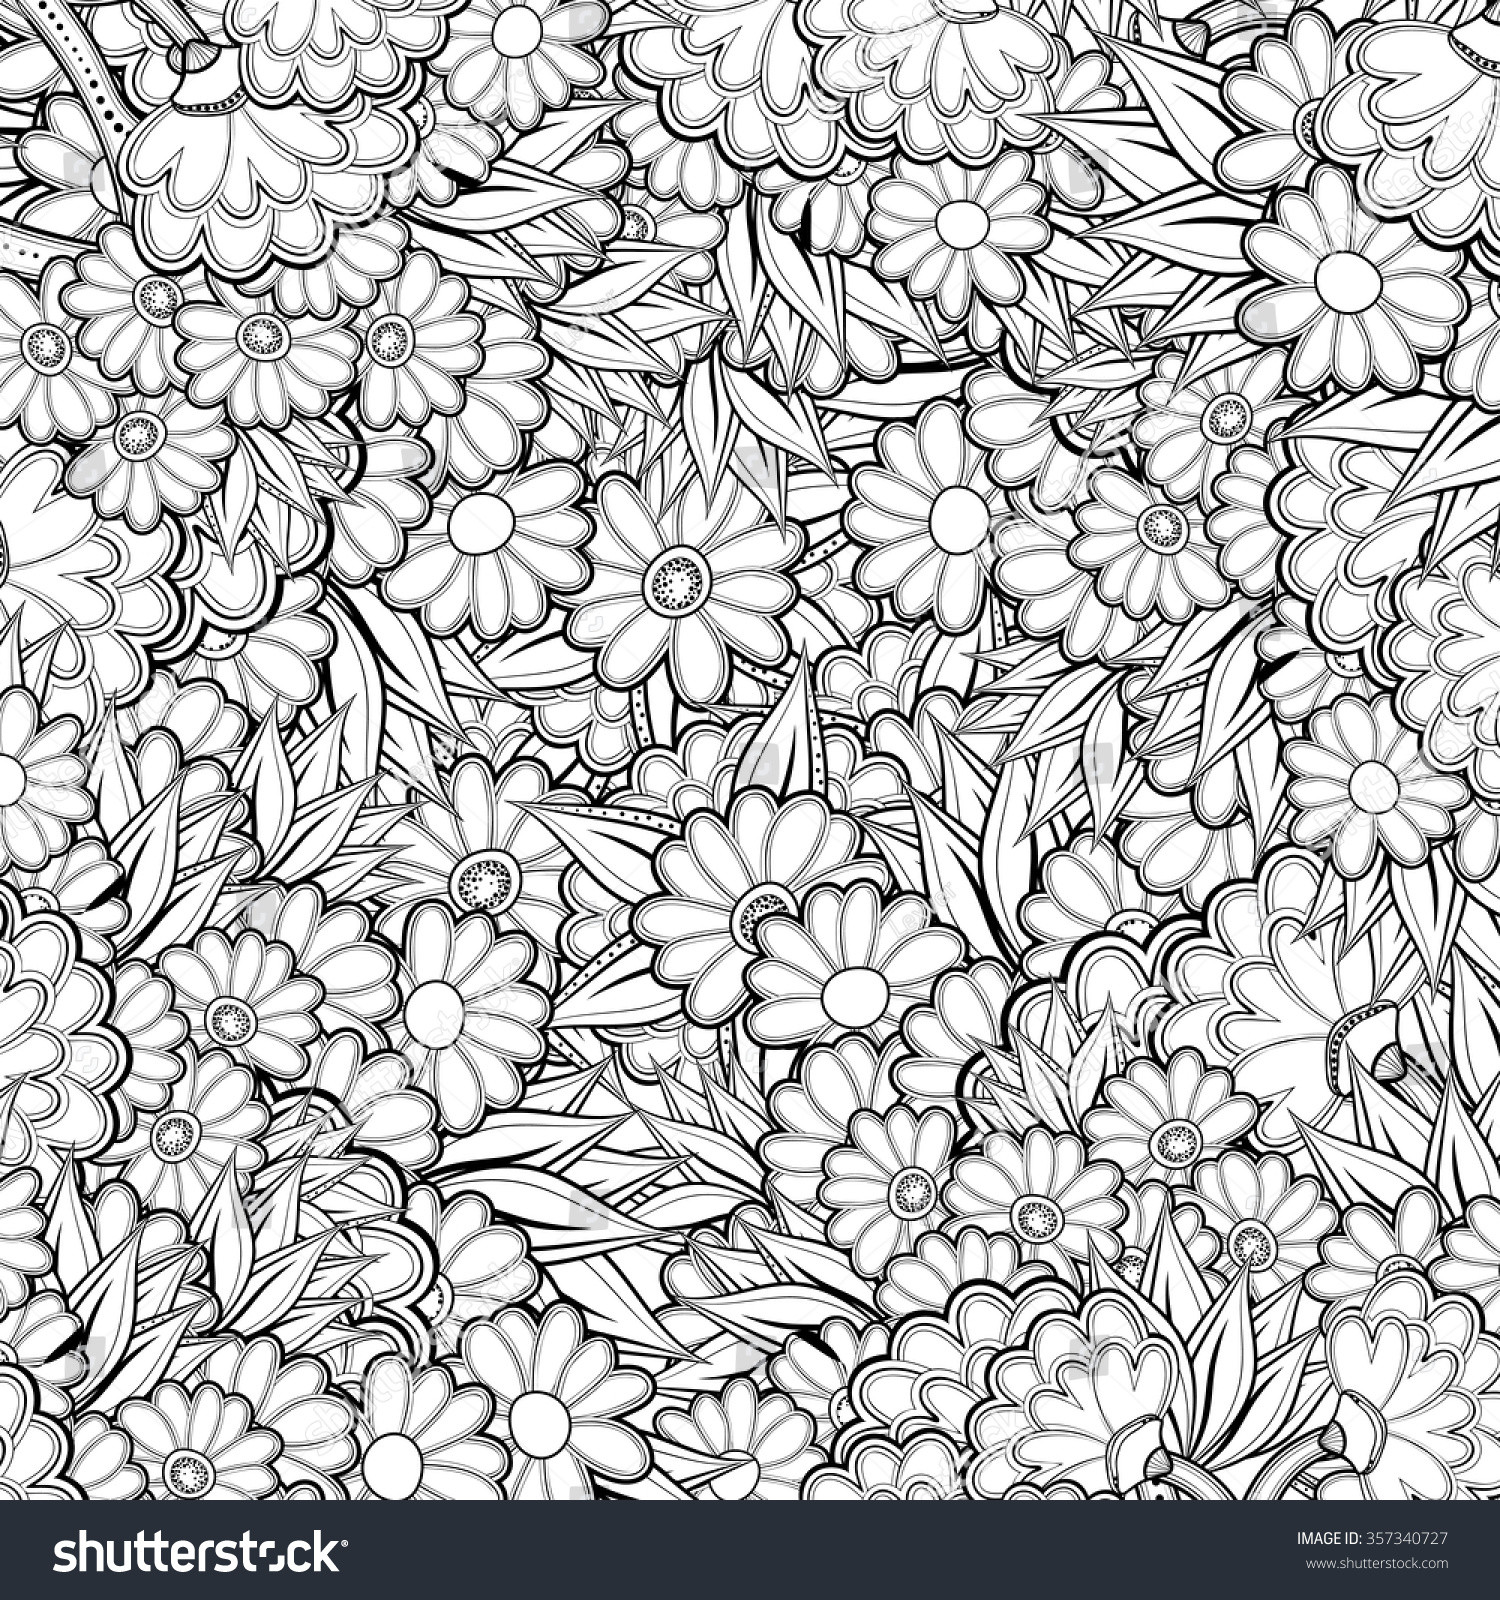 Coloring Pages For Adults Abstract Flowers
 Pattern Abstract Flowers Coloring Book Page Stock Vector